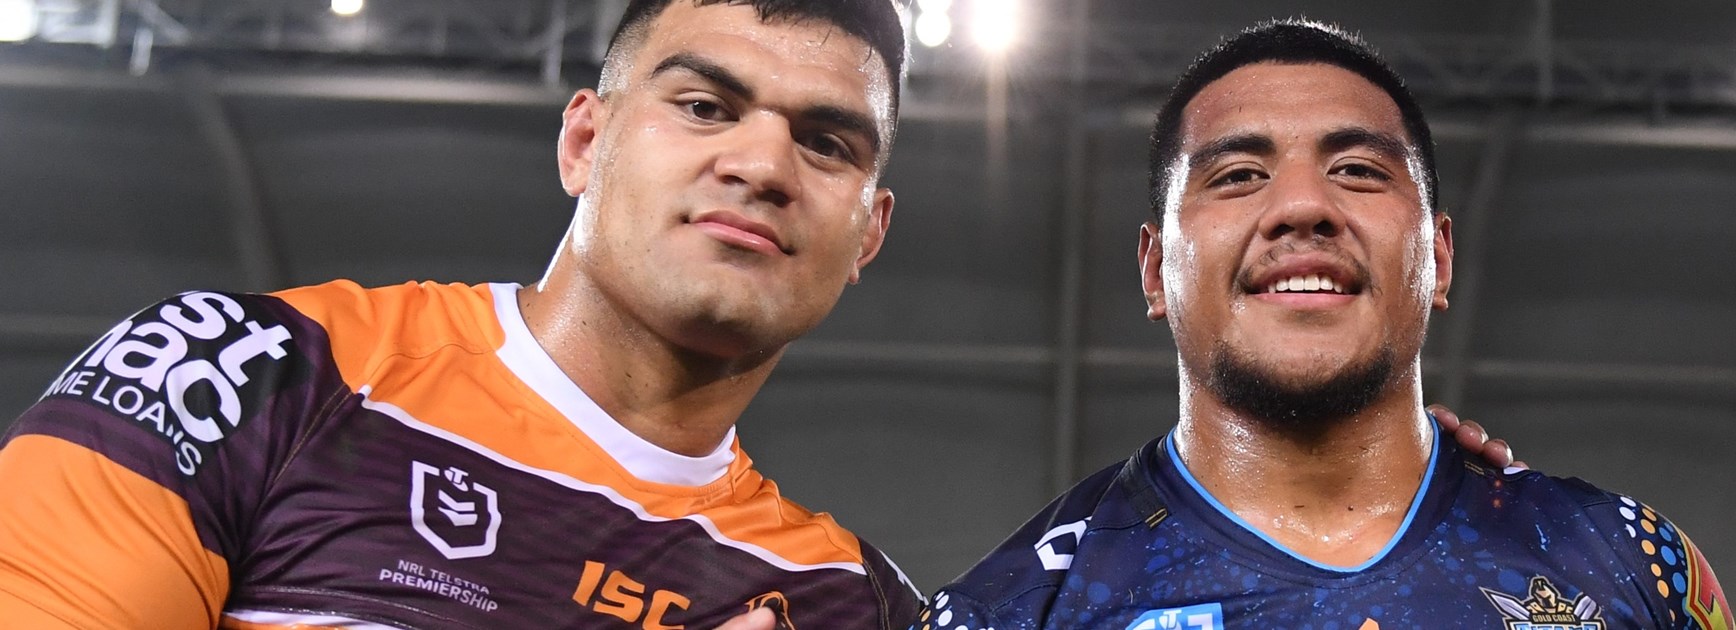 Fifita a perfect fit: Holbrook sees synergies across the park with star recruit